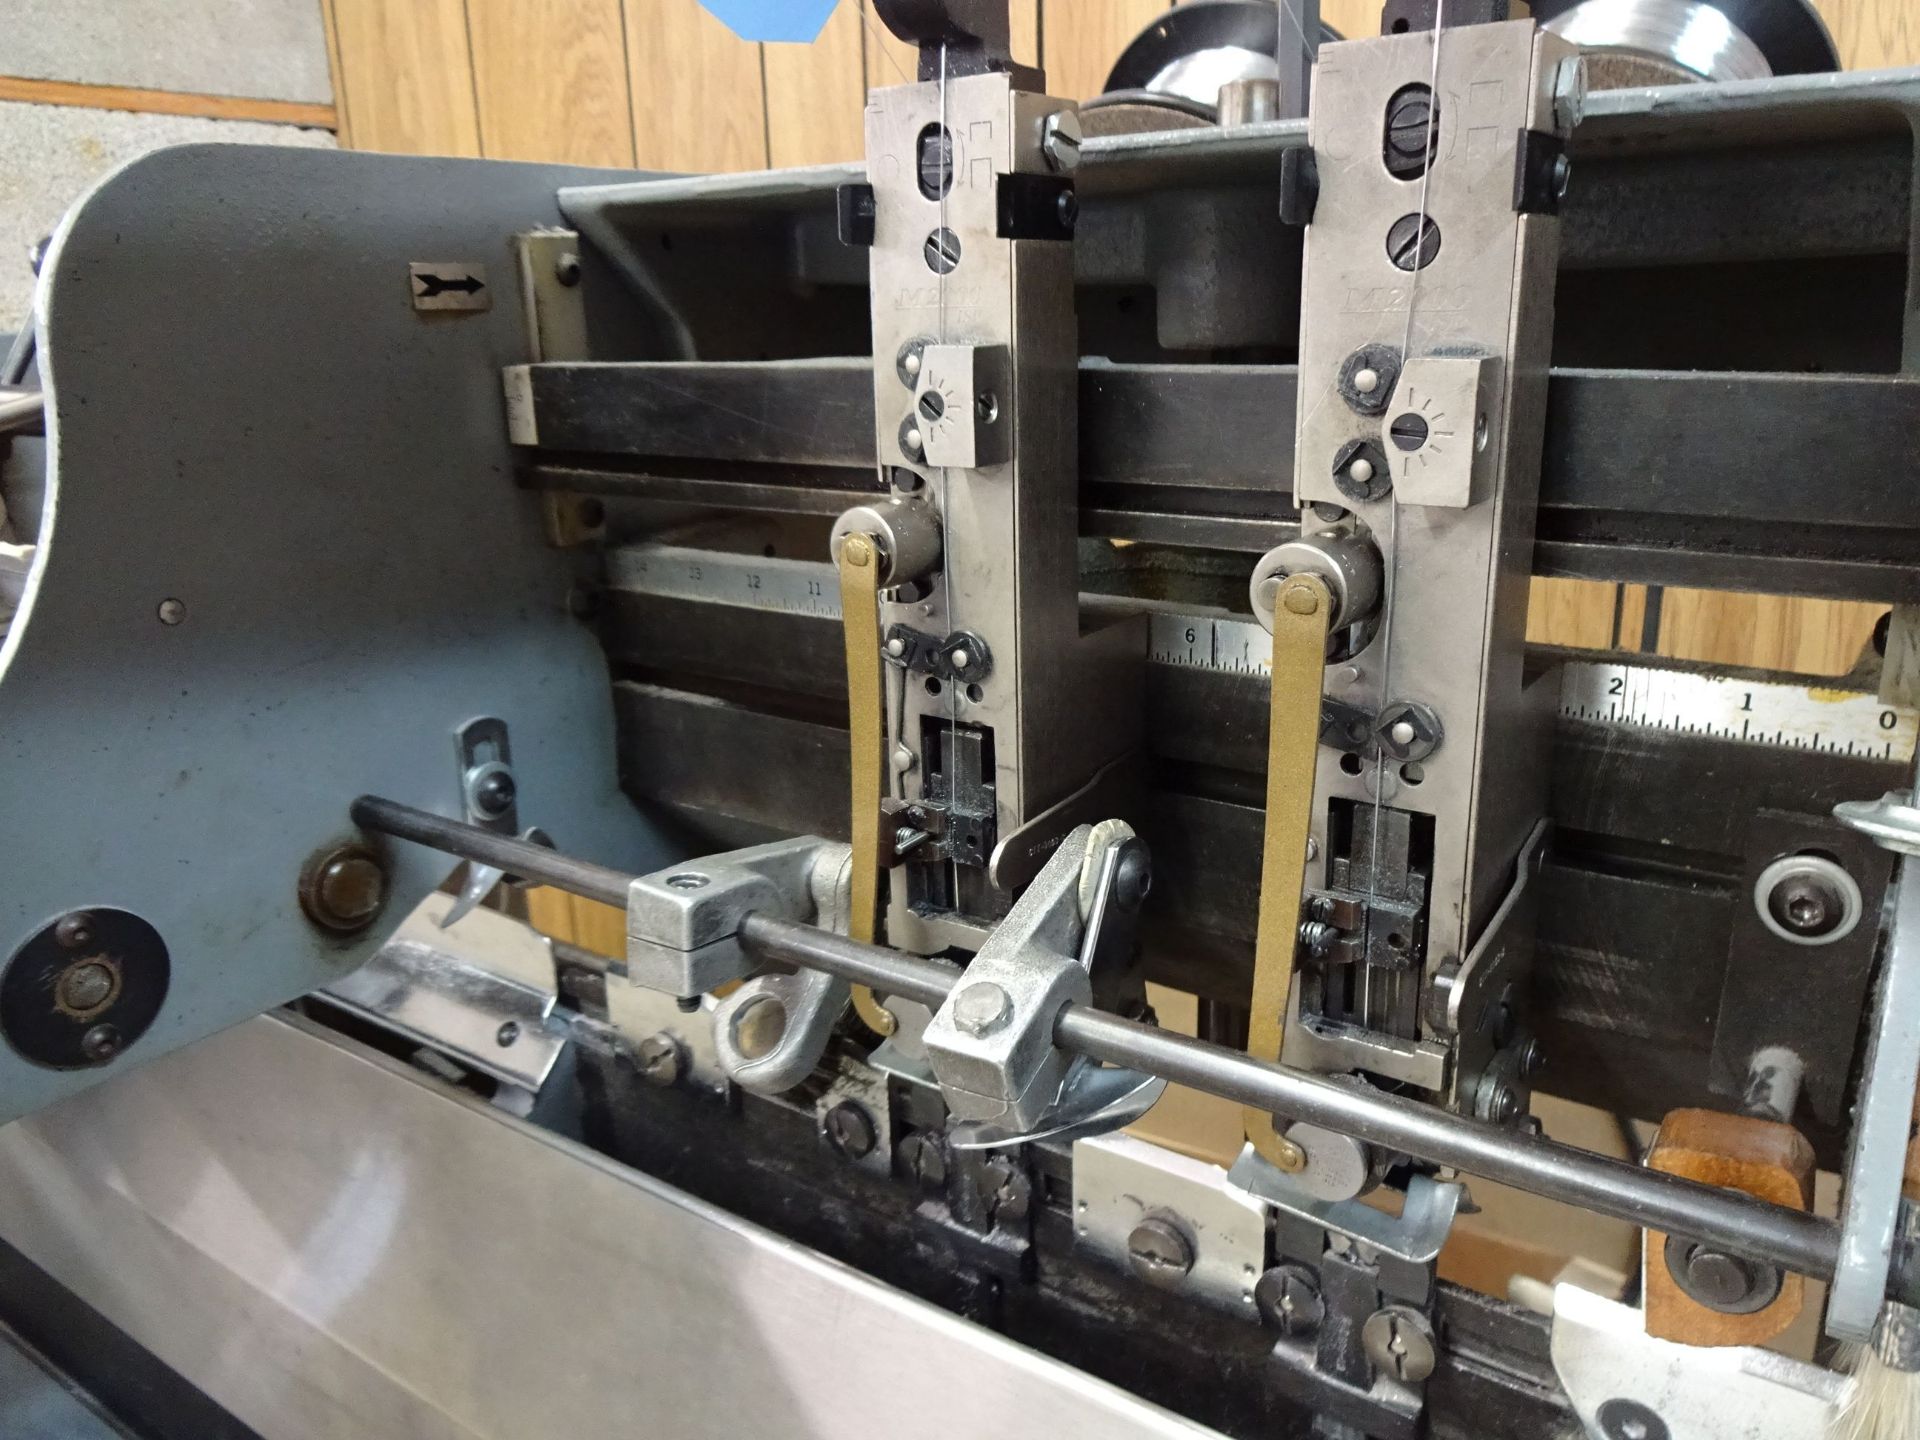 ROSBACK 2-HEAD MODEL 201 STITCHER; S/N 20175485, WITH (2) EXTRA STITCHING HEADS - $150.00 LOADING - Image 3 of 6